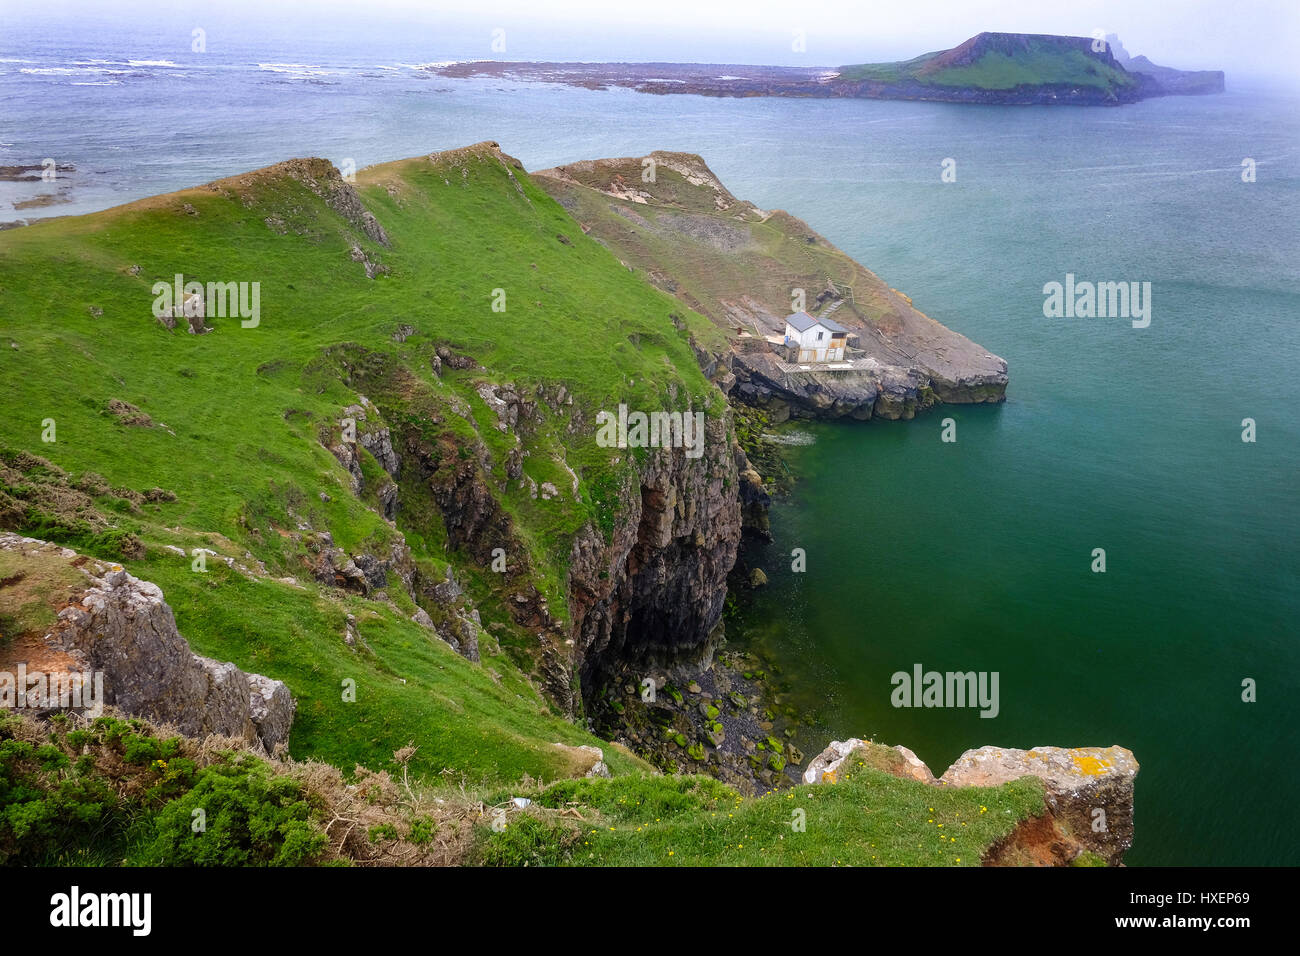 Worm's Head (tidal island) viewed from Rhossili Bay, Gower Peninsula, South Wales (UK). Worm's Head consists of two islands, Inner and Outer Head. Stock Photo